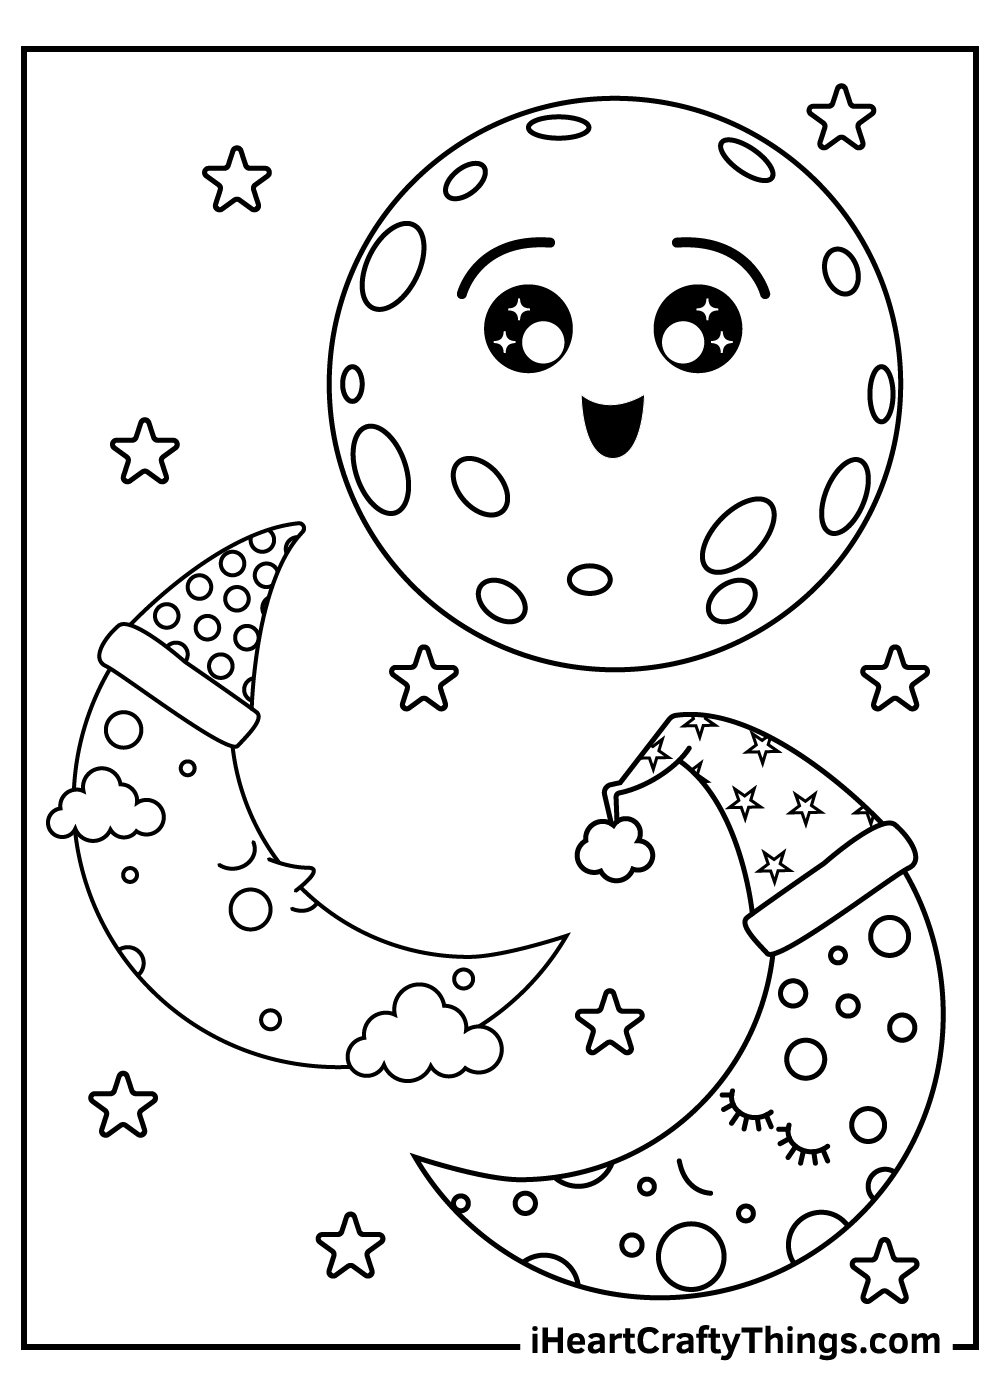 Moon coloring pages free printables